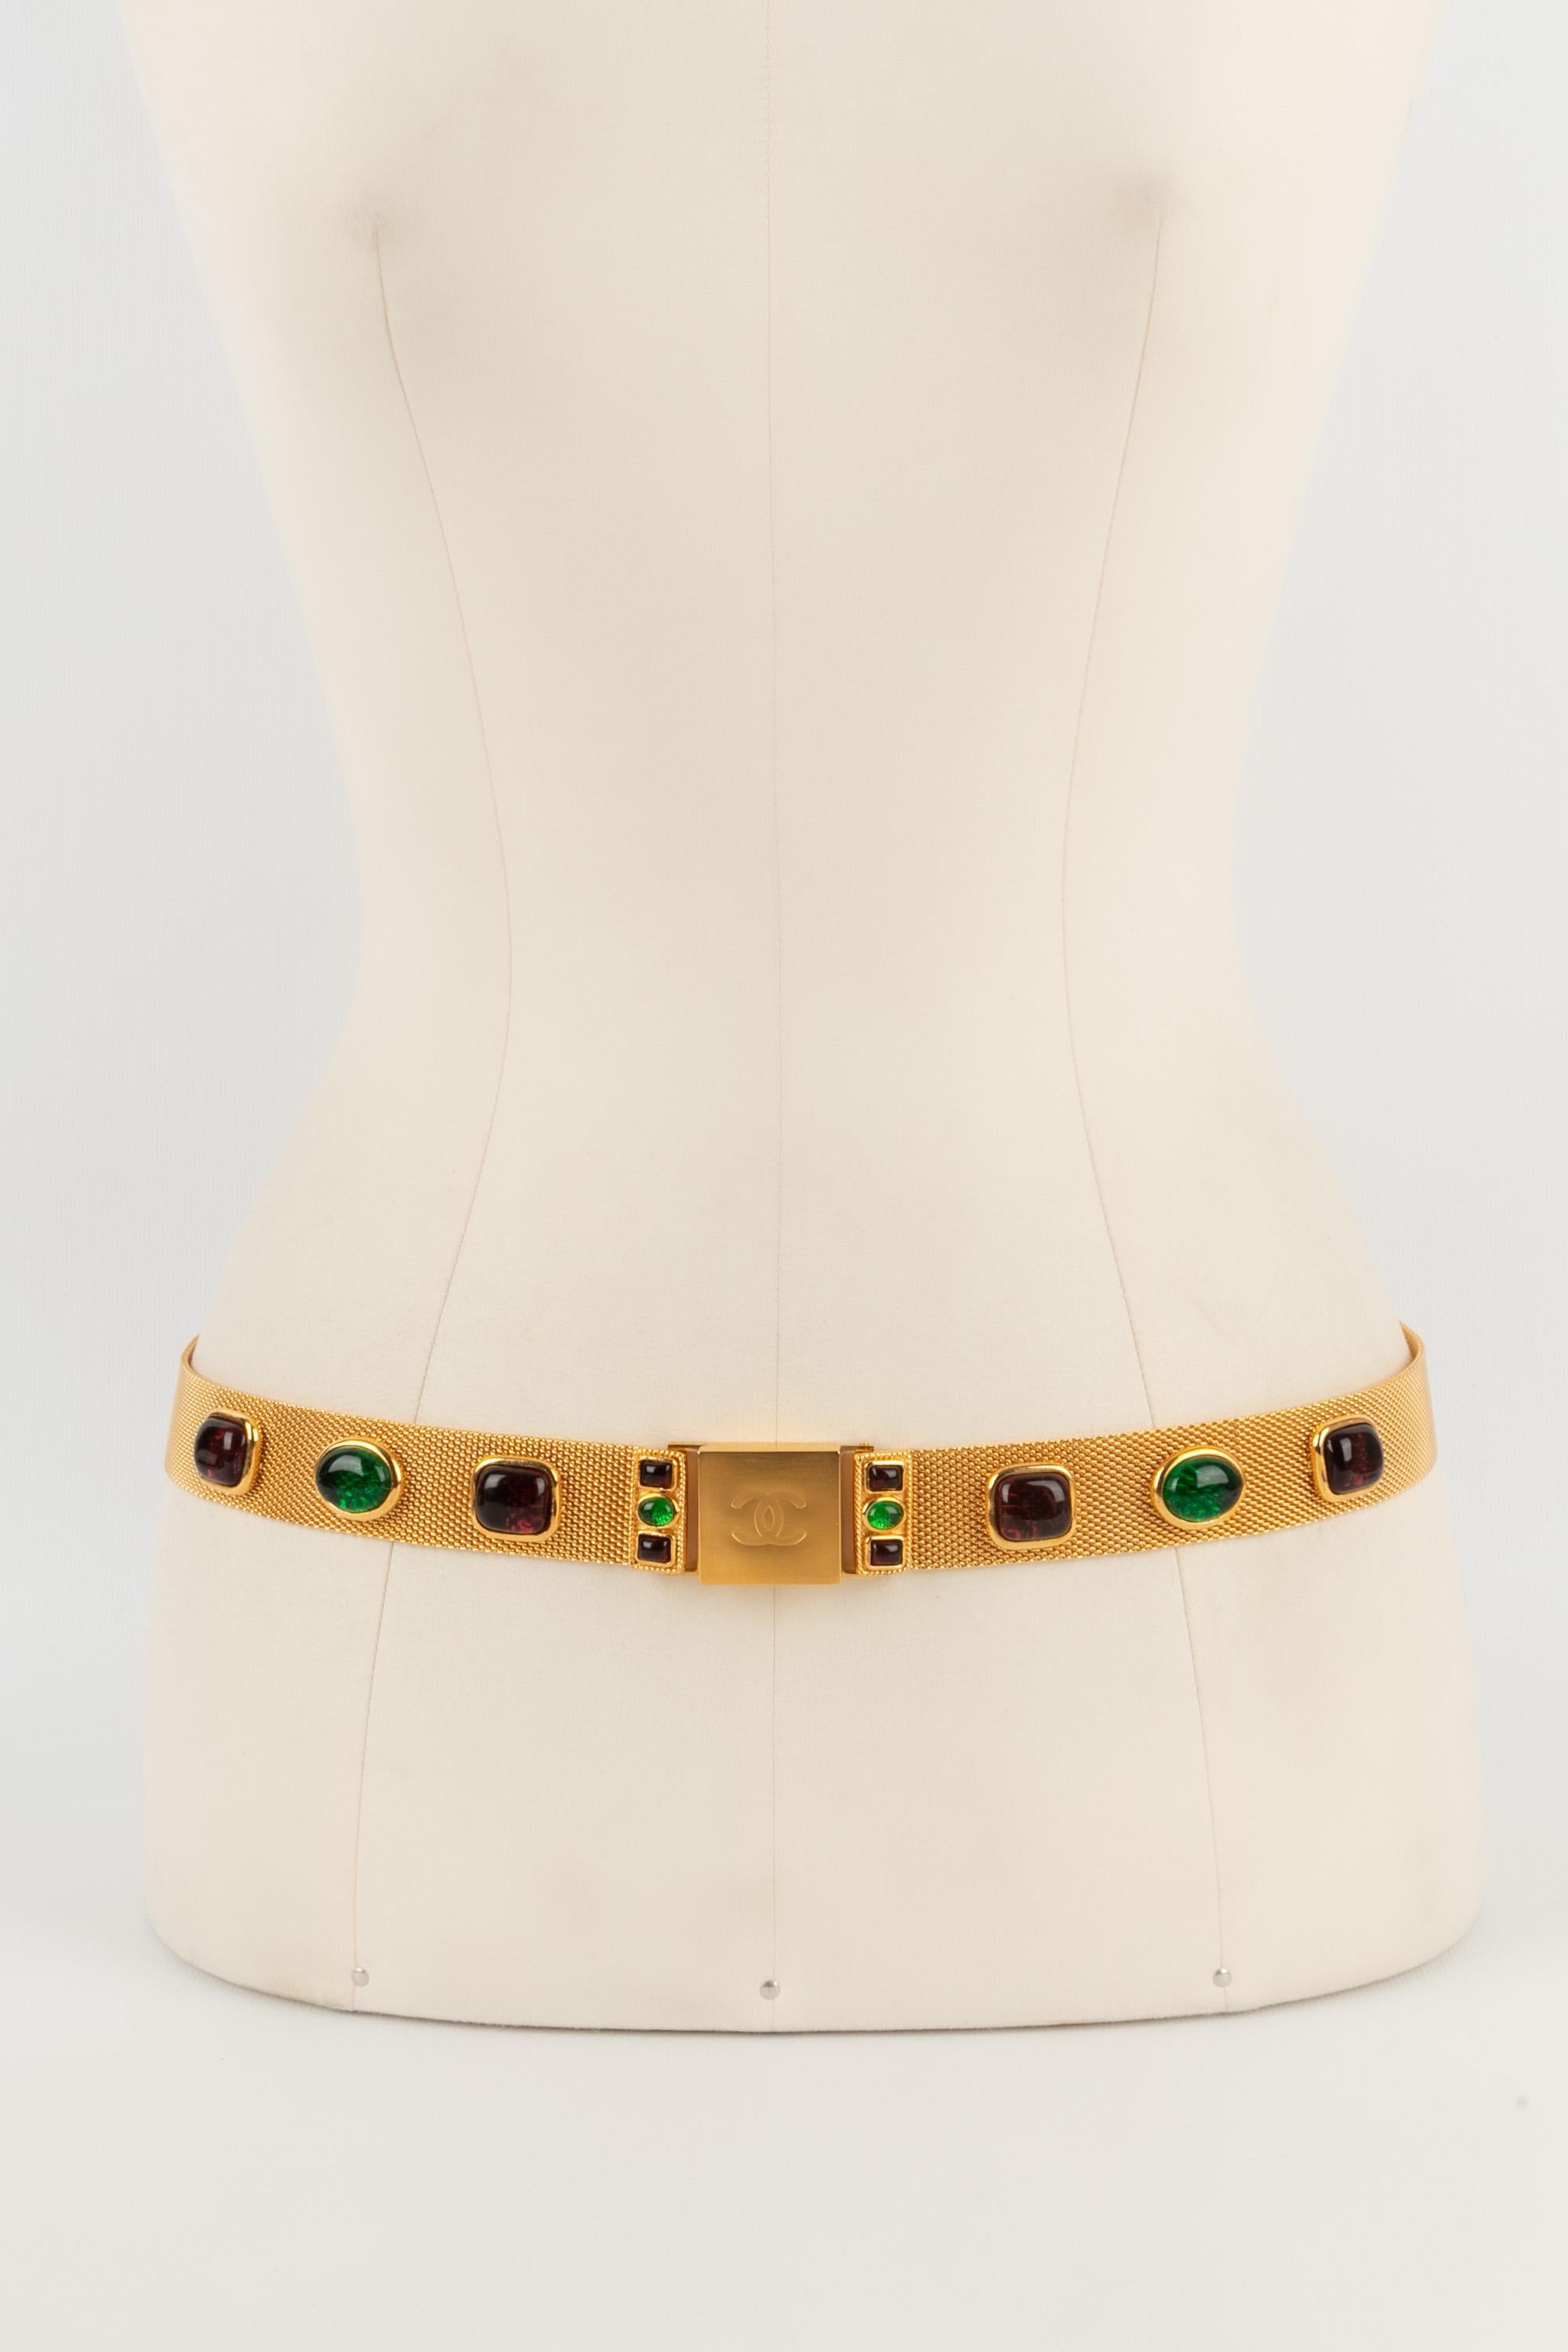 CHANEL - Golden metal Chanel belt with glass paste cabochons.

Condition:
Very good condition

Dimensions:
Length: 81 cm

CCB75